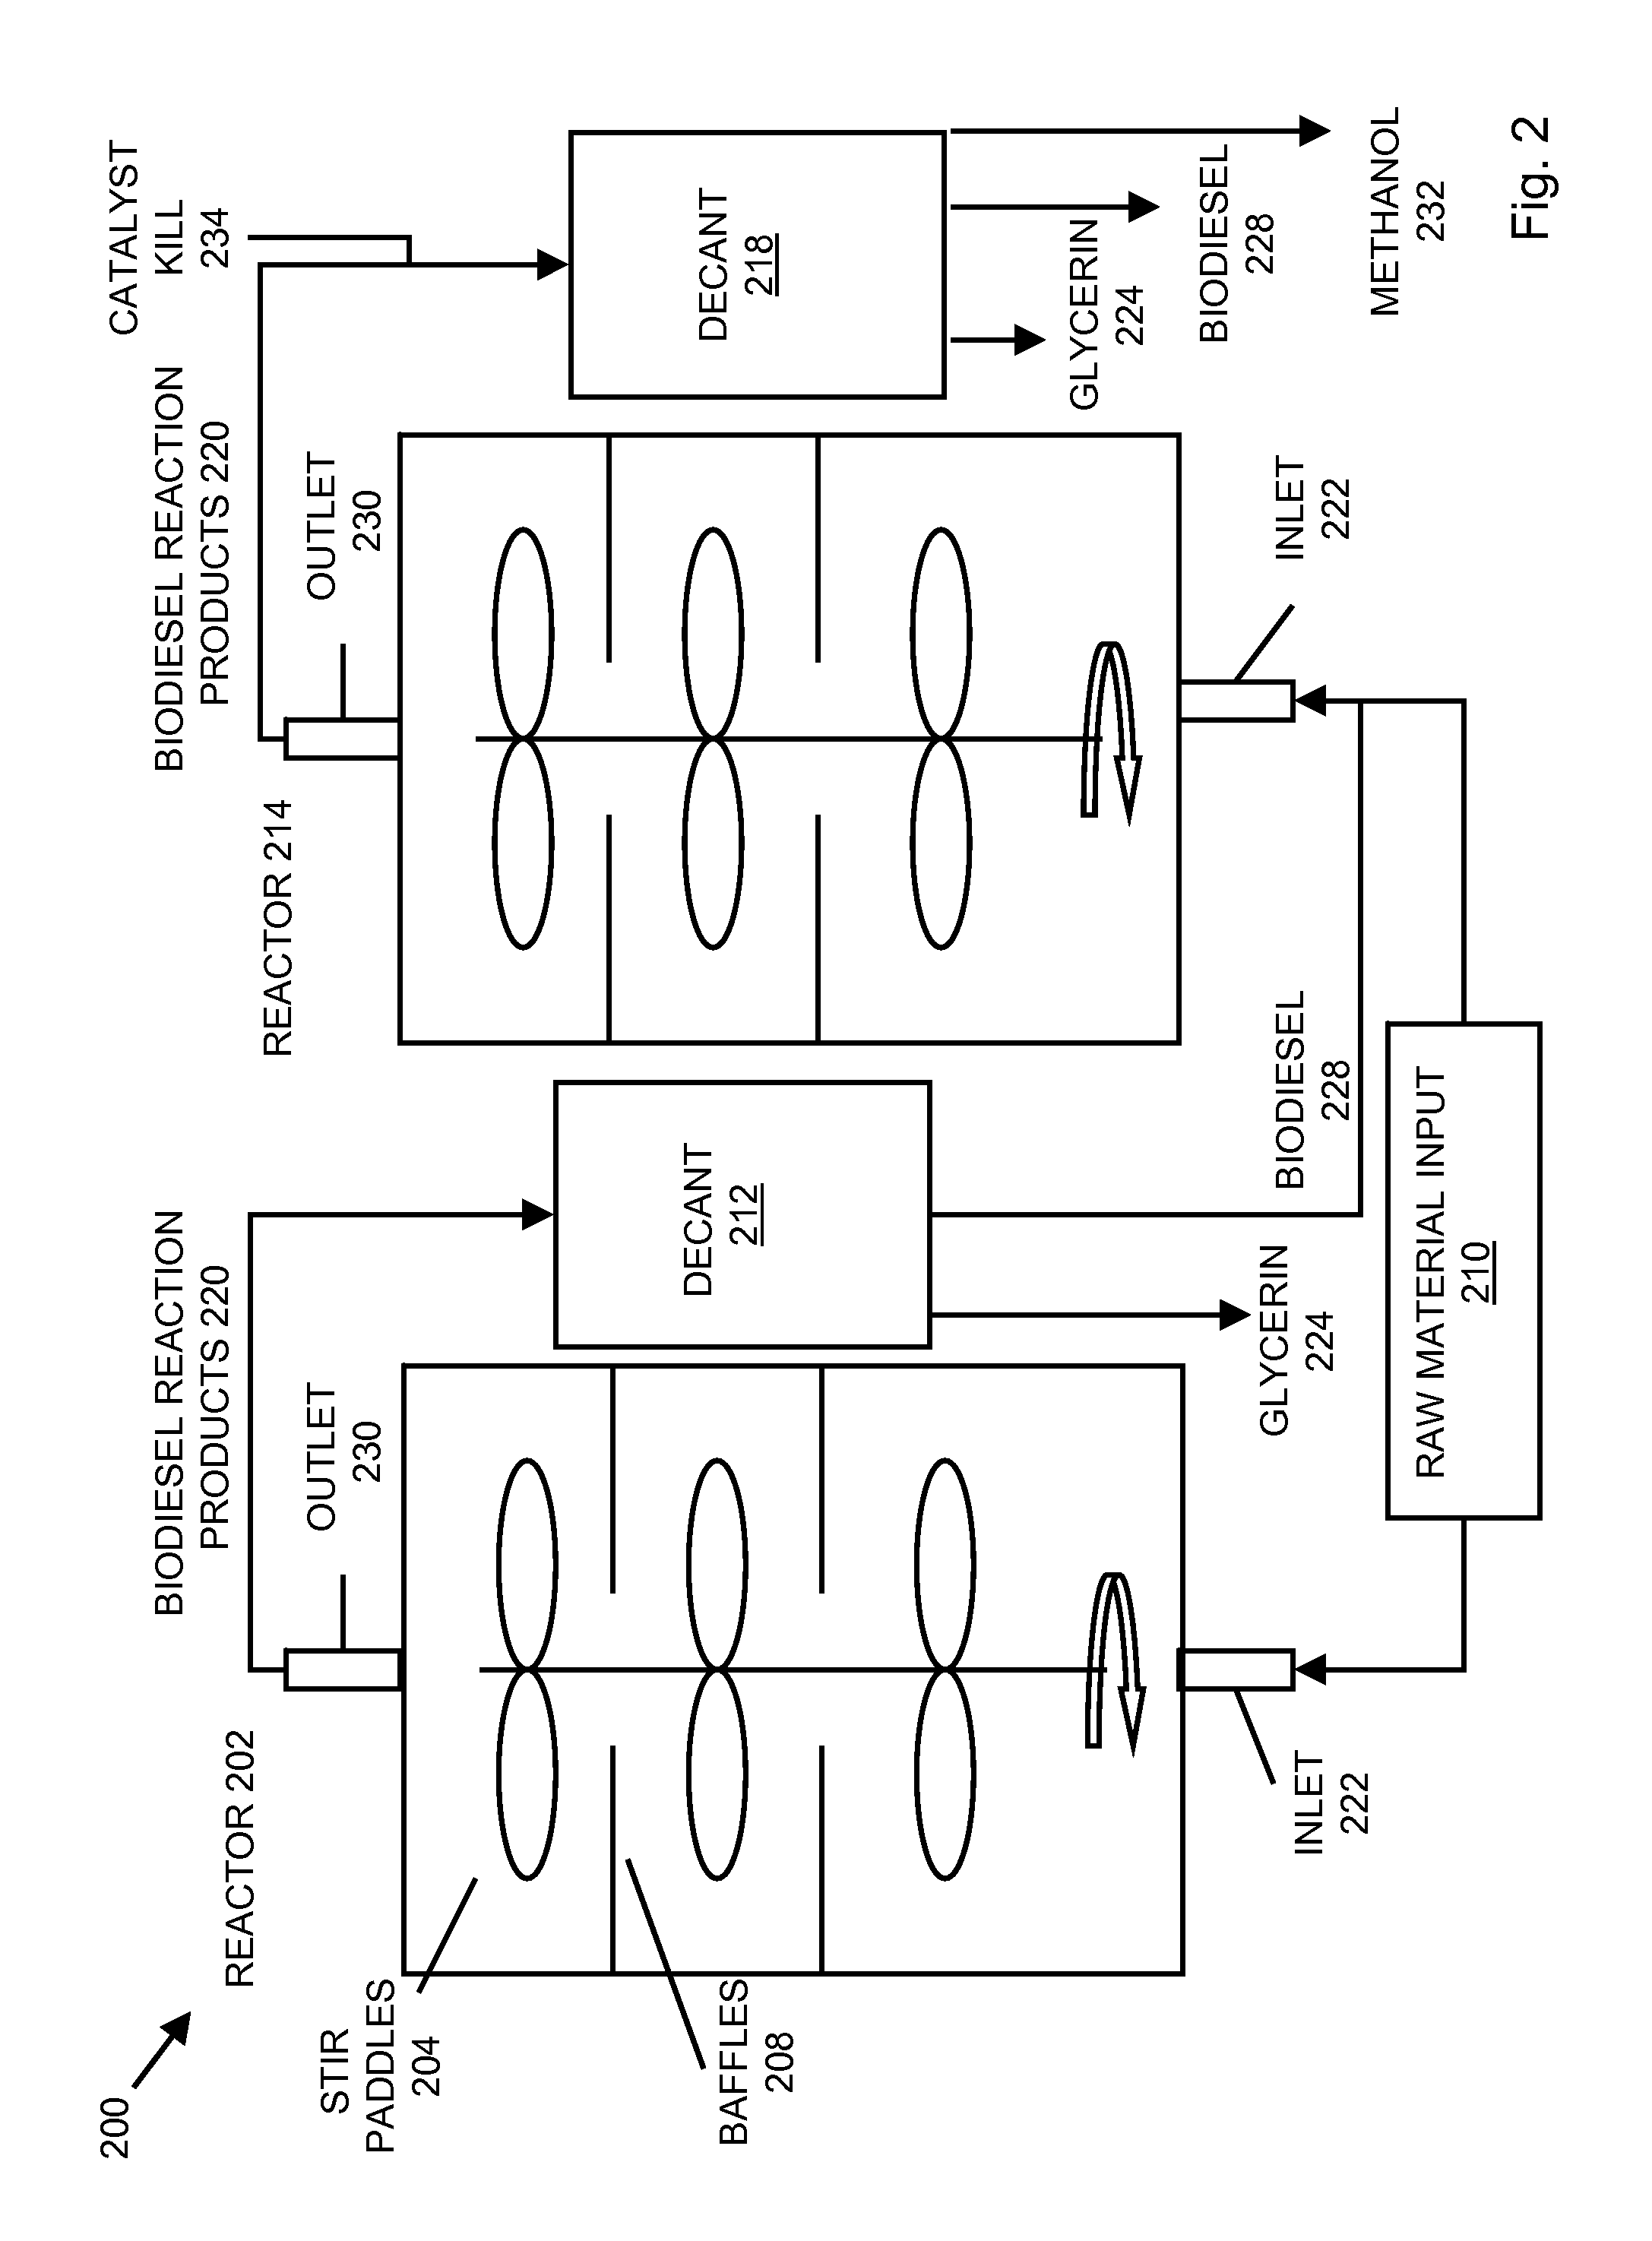 System and process for producing biodiesel